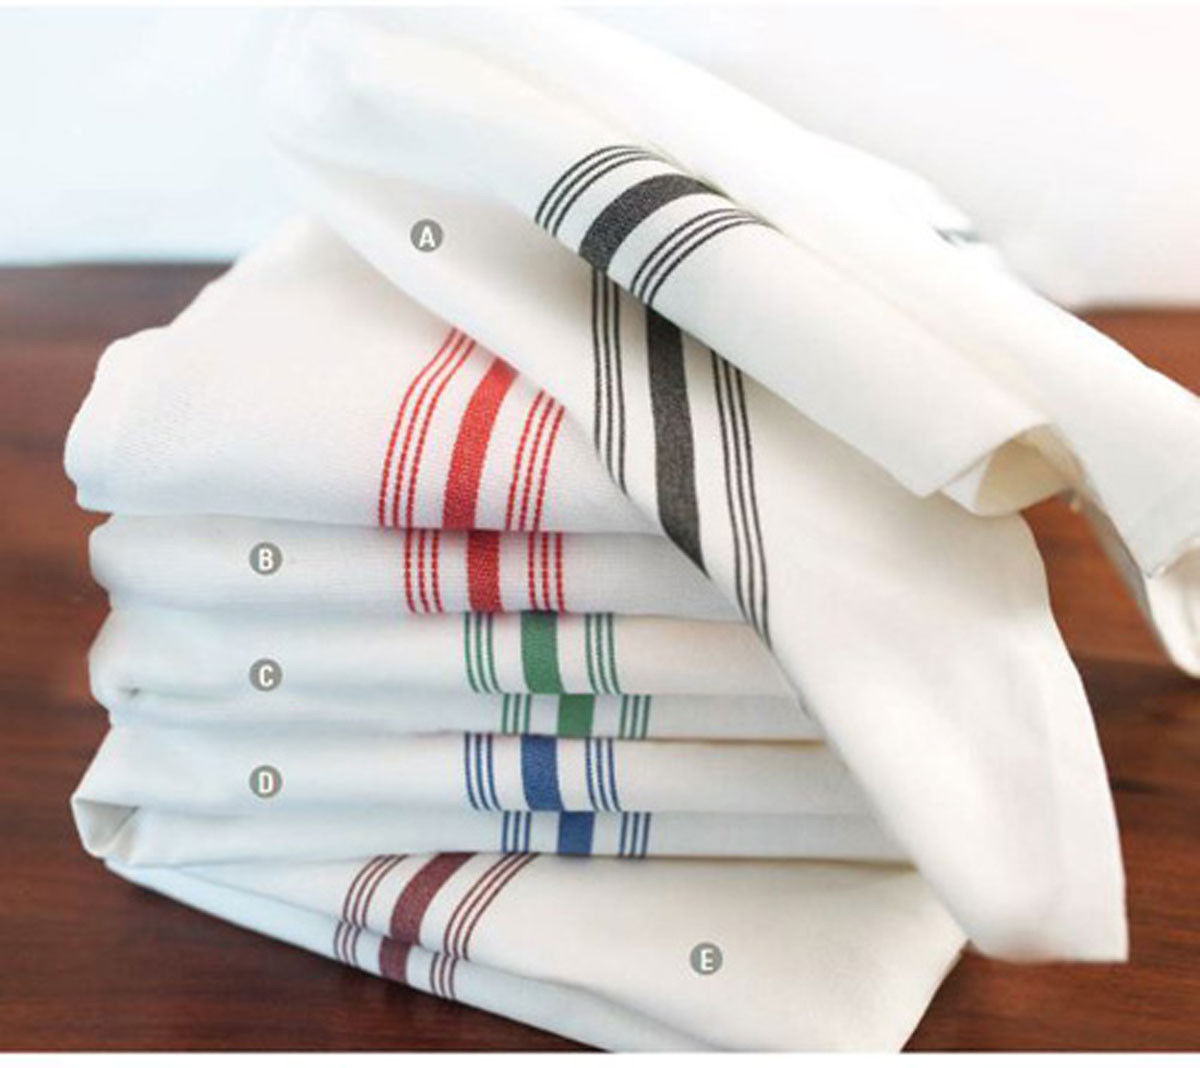 What material are restaurant napkins made of?